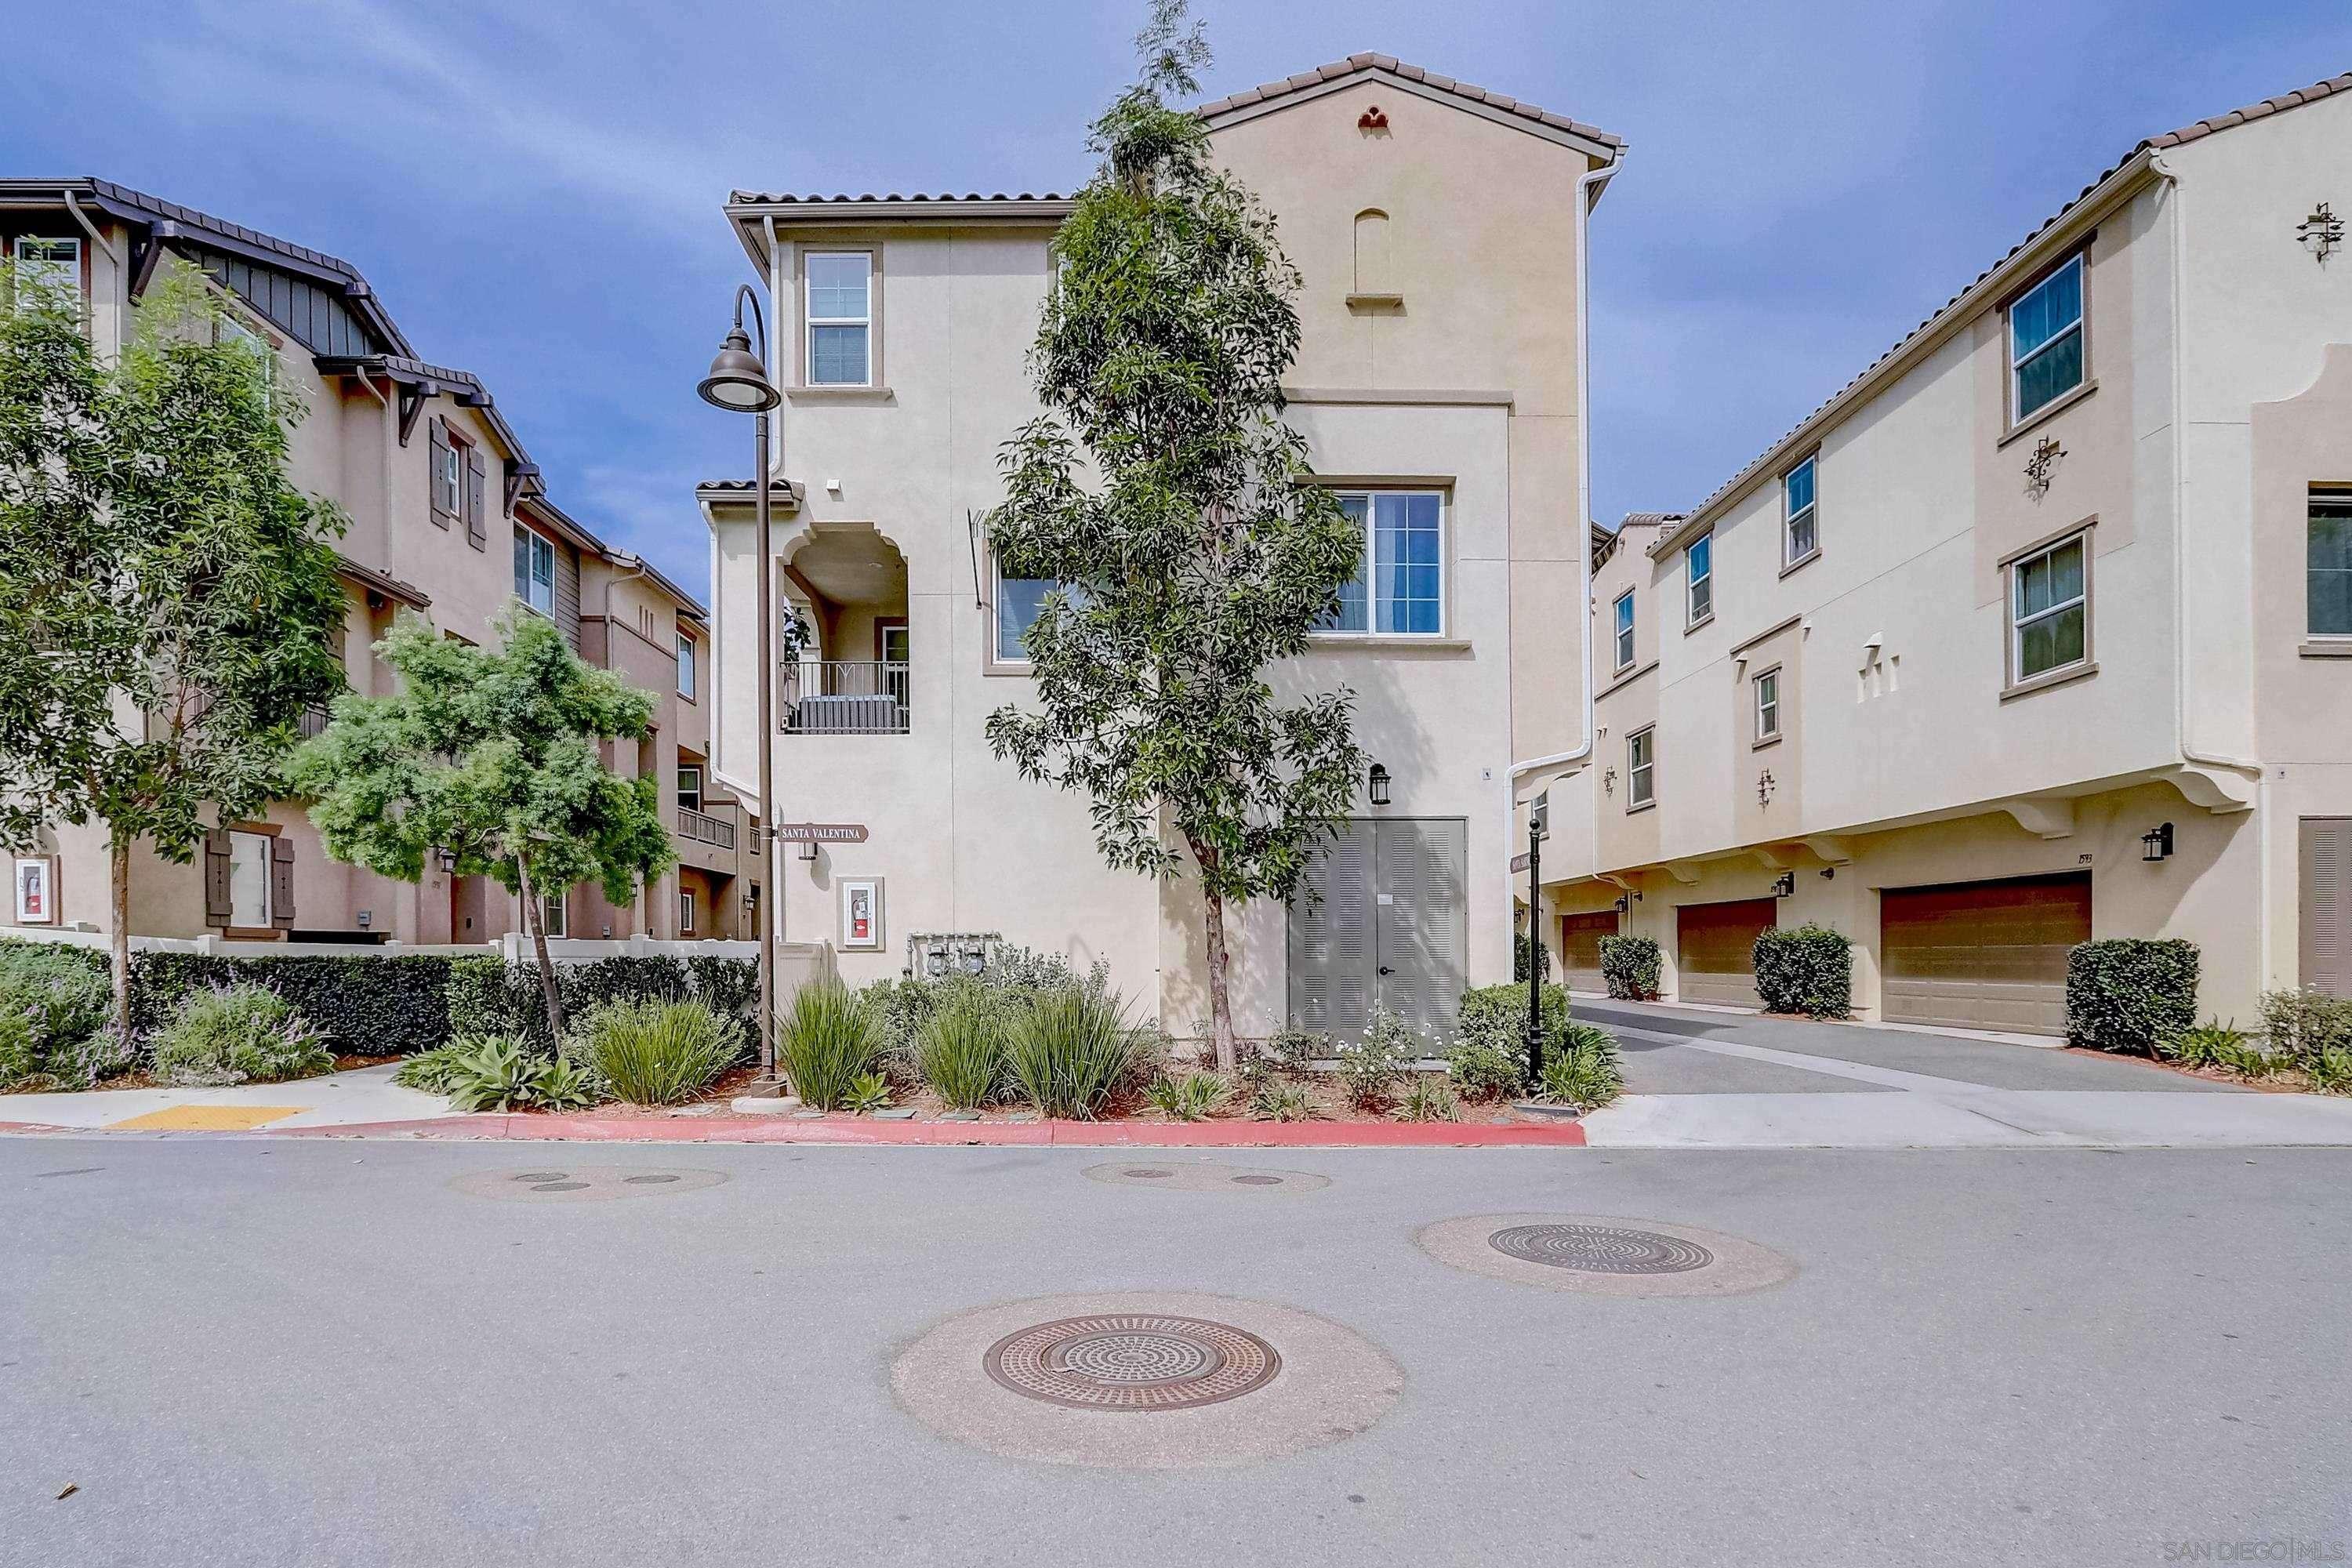 A light colored stucco condo building surrounded by small trees and drought-friendly landscaping